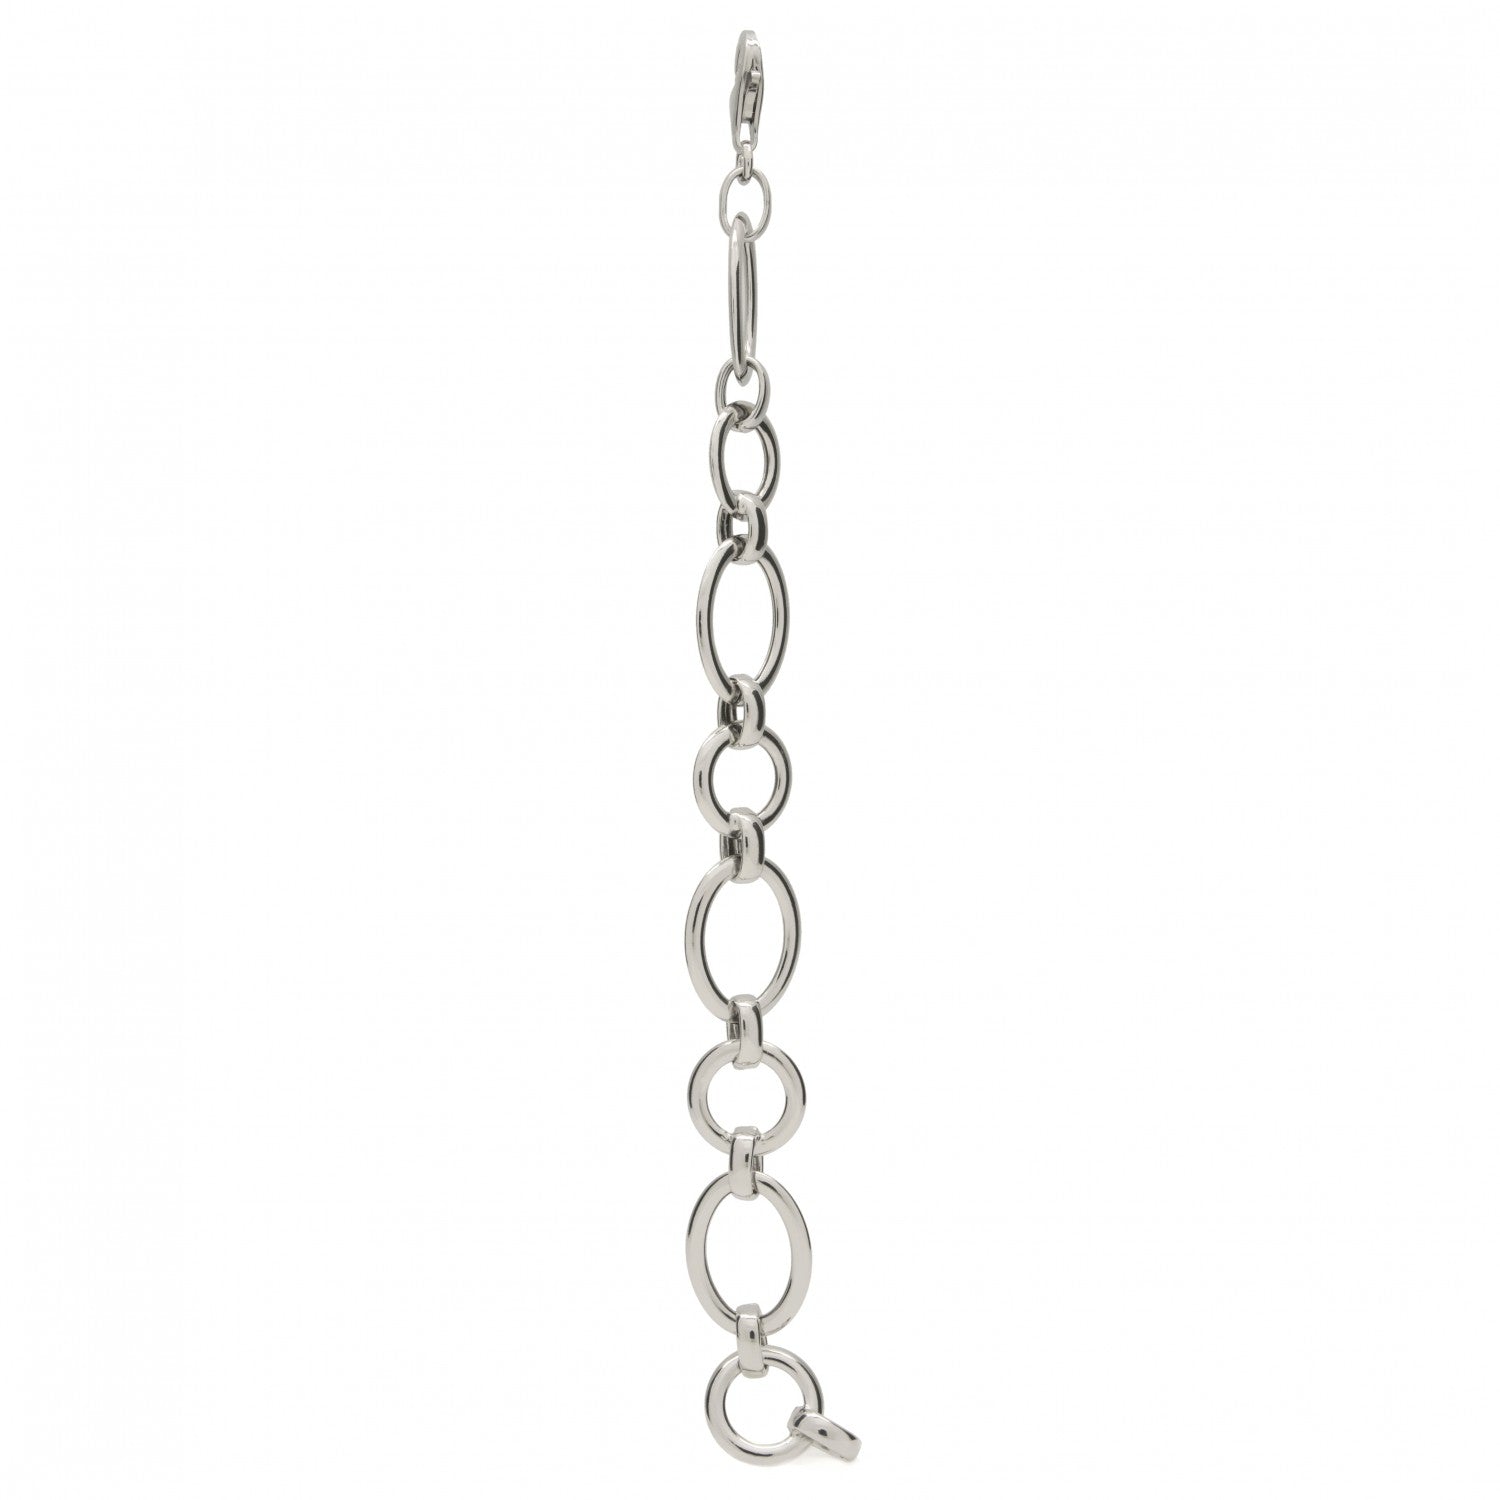 Silver link bracelet with oval design two sizes